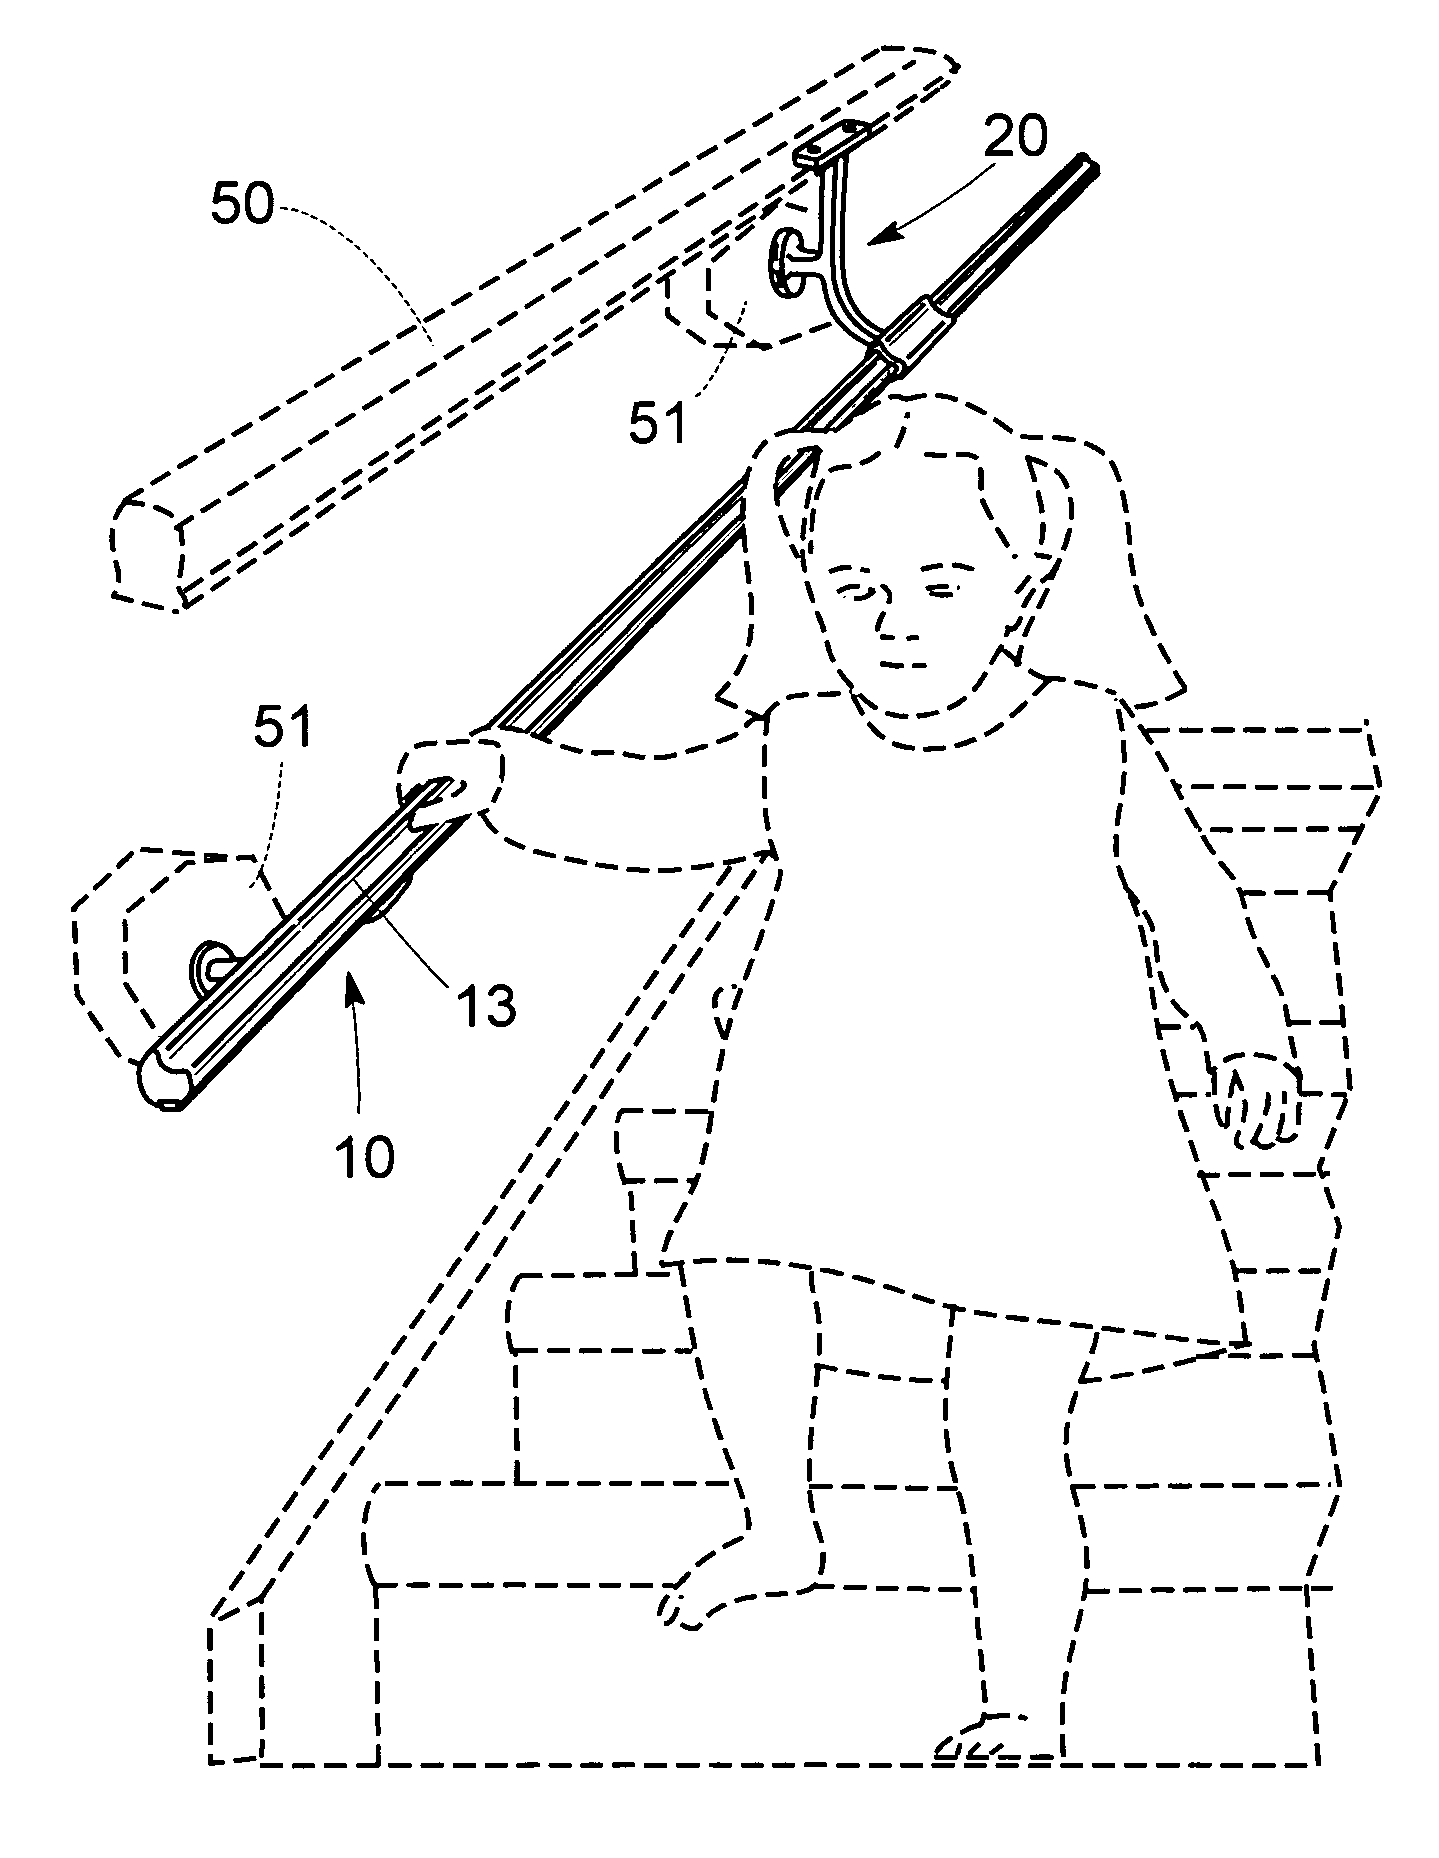 Handrail for toddlers